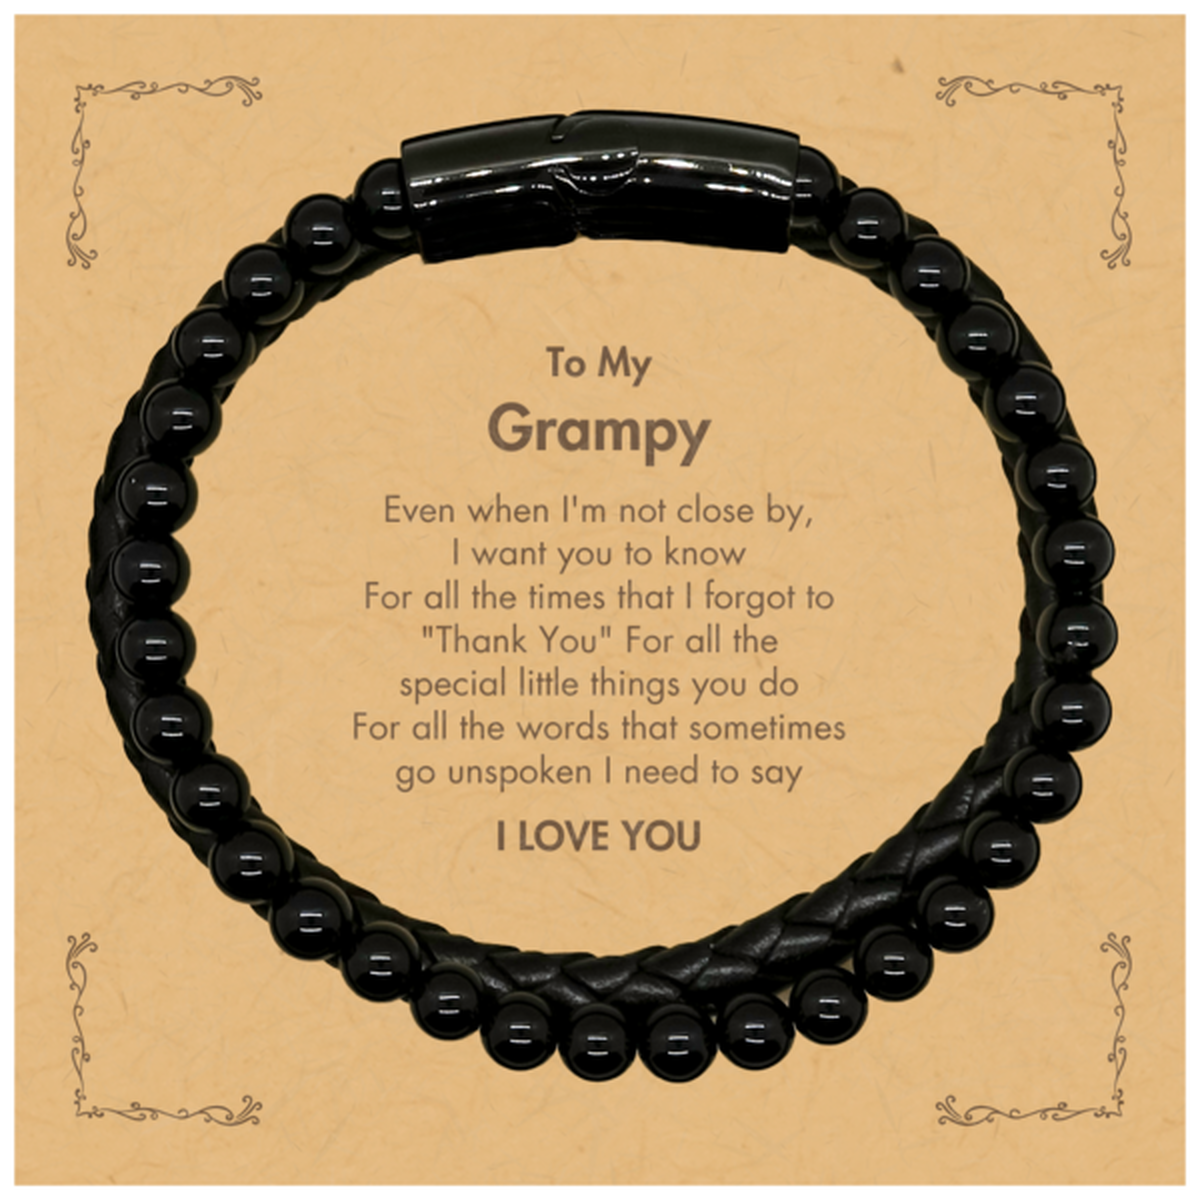 Thank You Gifts for Grampy, Keepsake Stone Leather Bracelets Gifts for Grampy Birthday Mother's day Father's Day Grampy For all the words That sometimes go unspoken I need to say I LOVE YOU